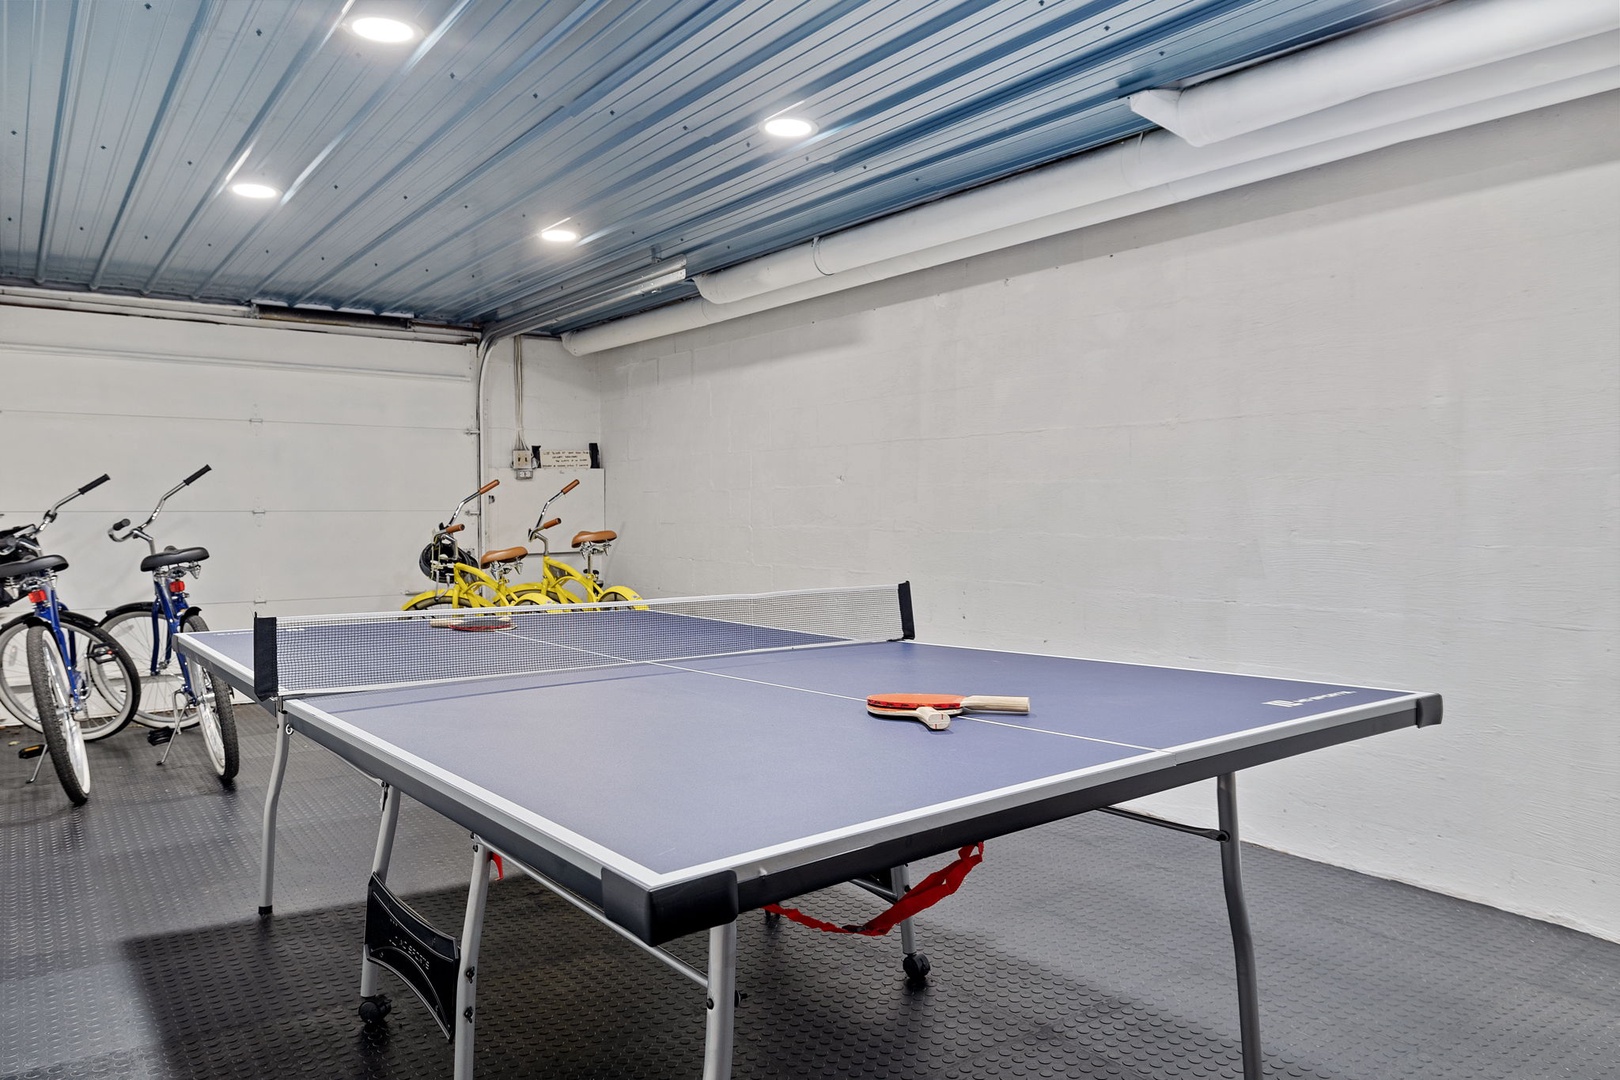 Mosey over to the garage space for a game of ping-pong.